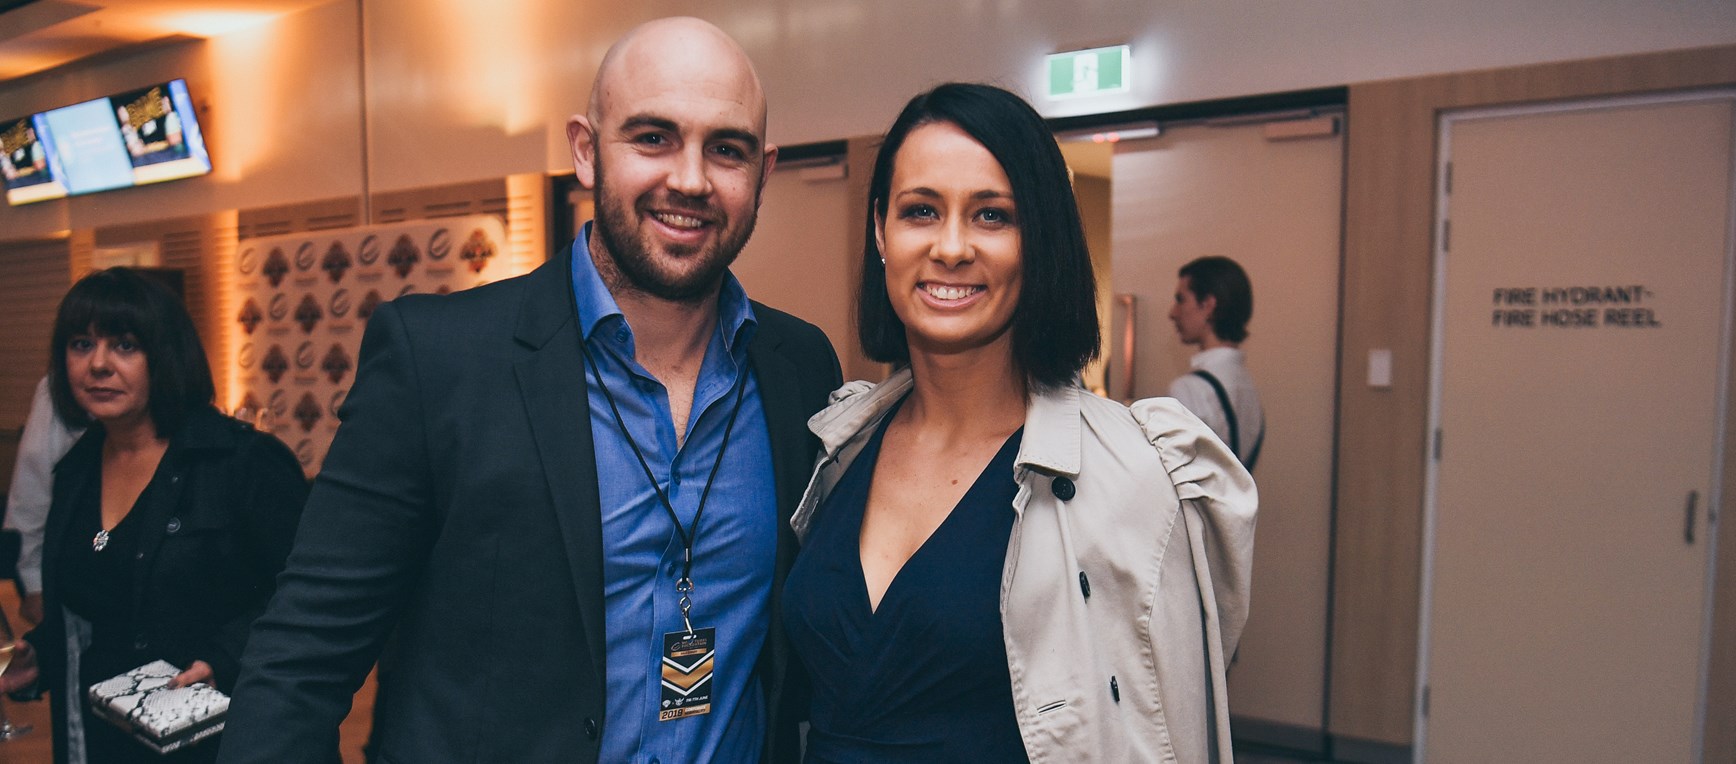 All the photos from the 2019 Wests Tigers Foundation Gala Dinner